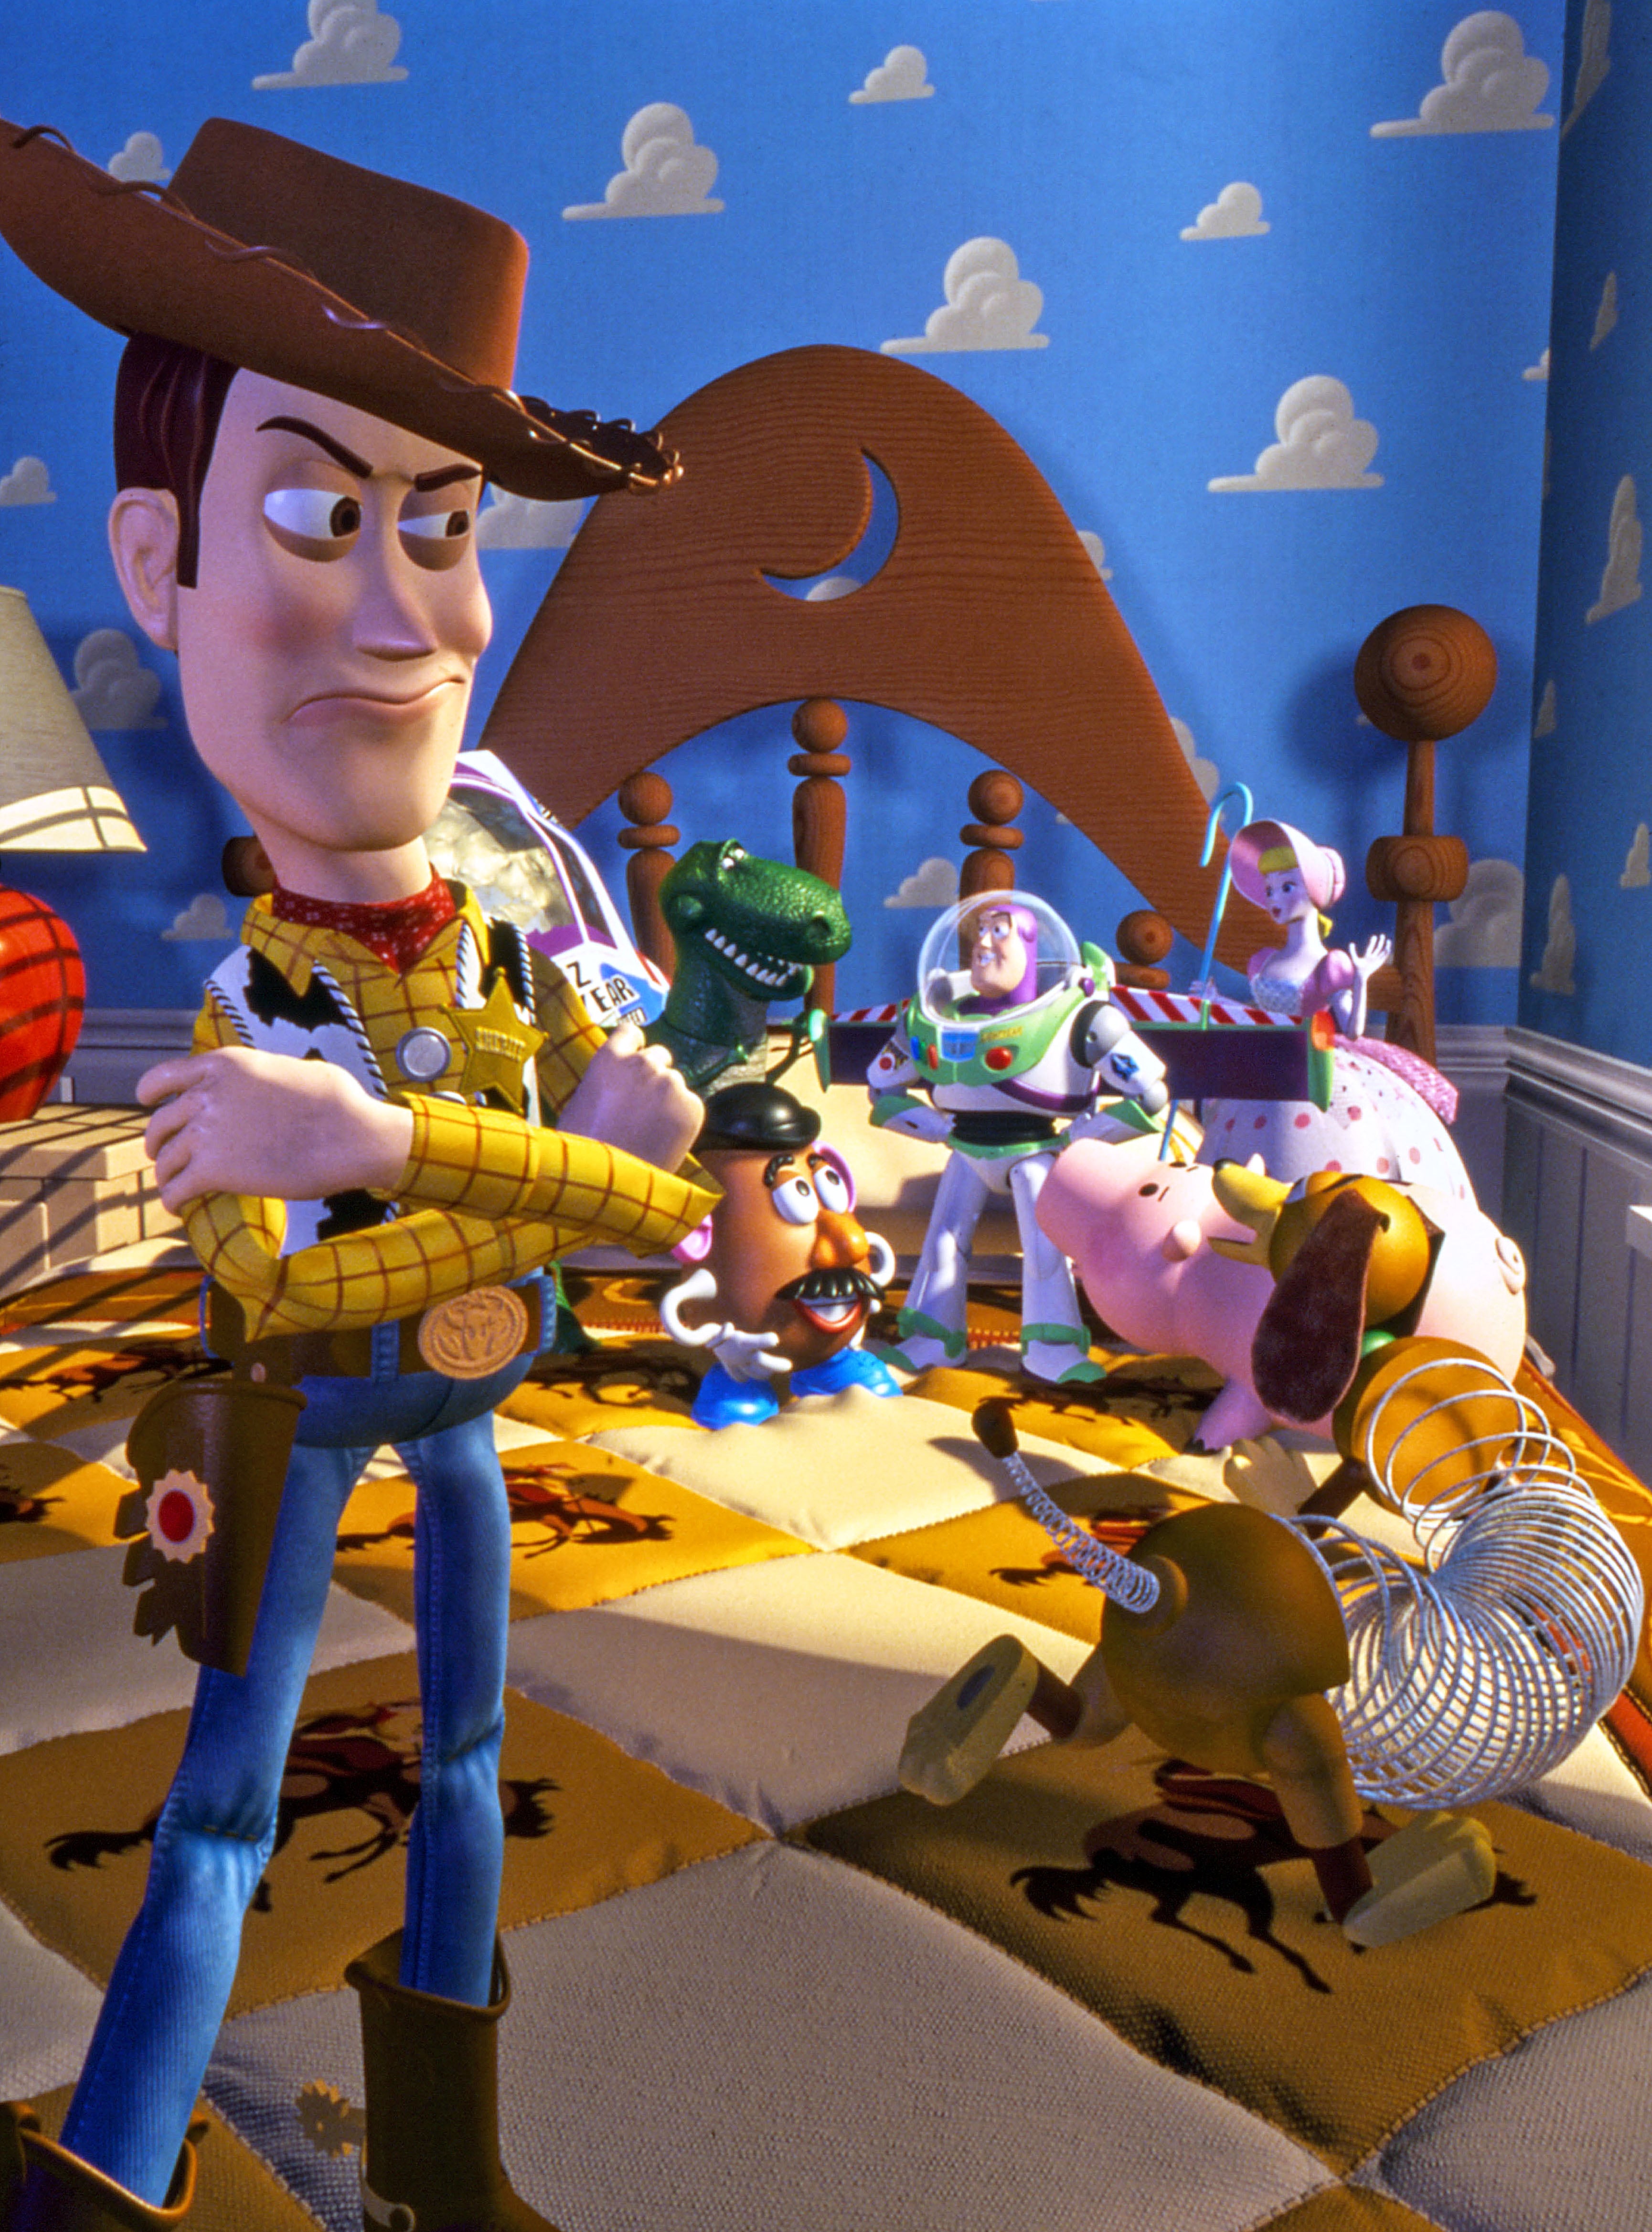 Bonnie's room from Toy Story 3. Love the green and purple.